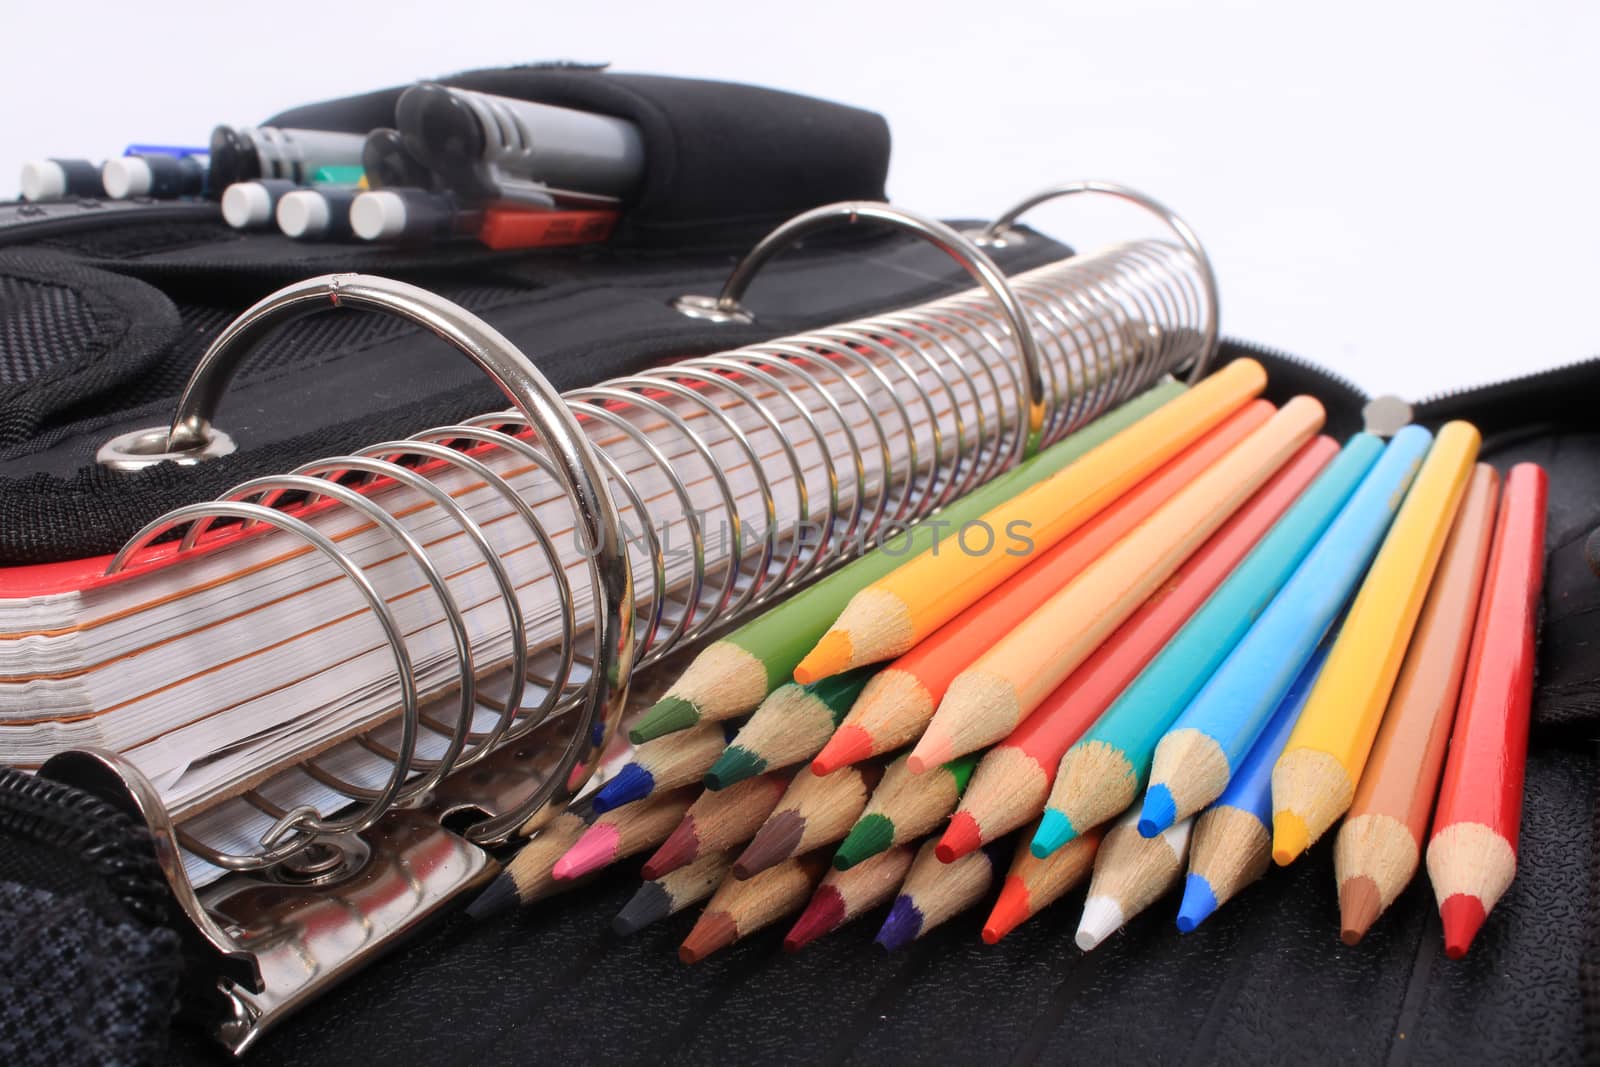 Colorful sharpened  pencil crayons for school  beside  three ring binder containing pens and pencils in pocket